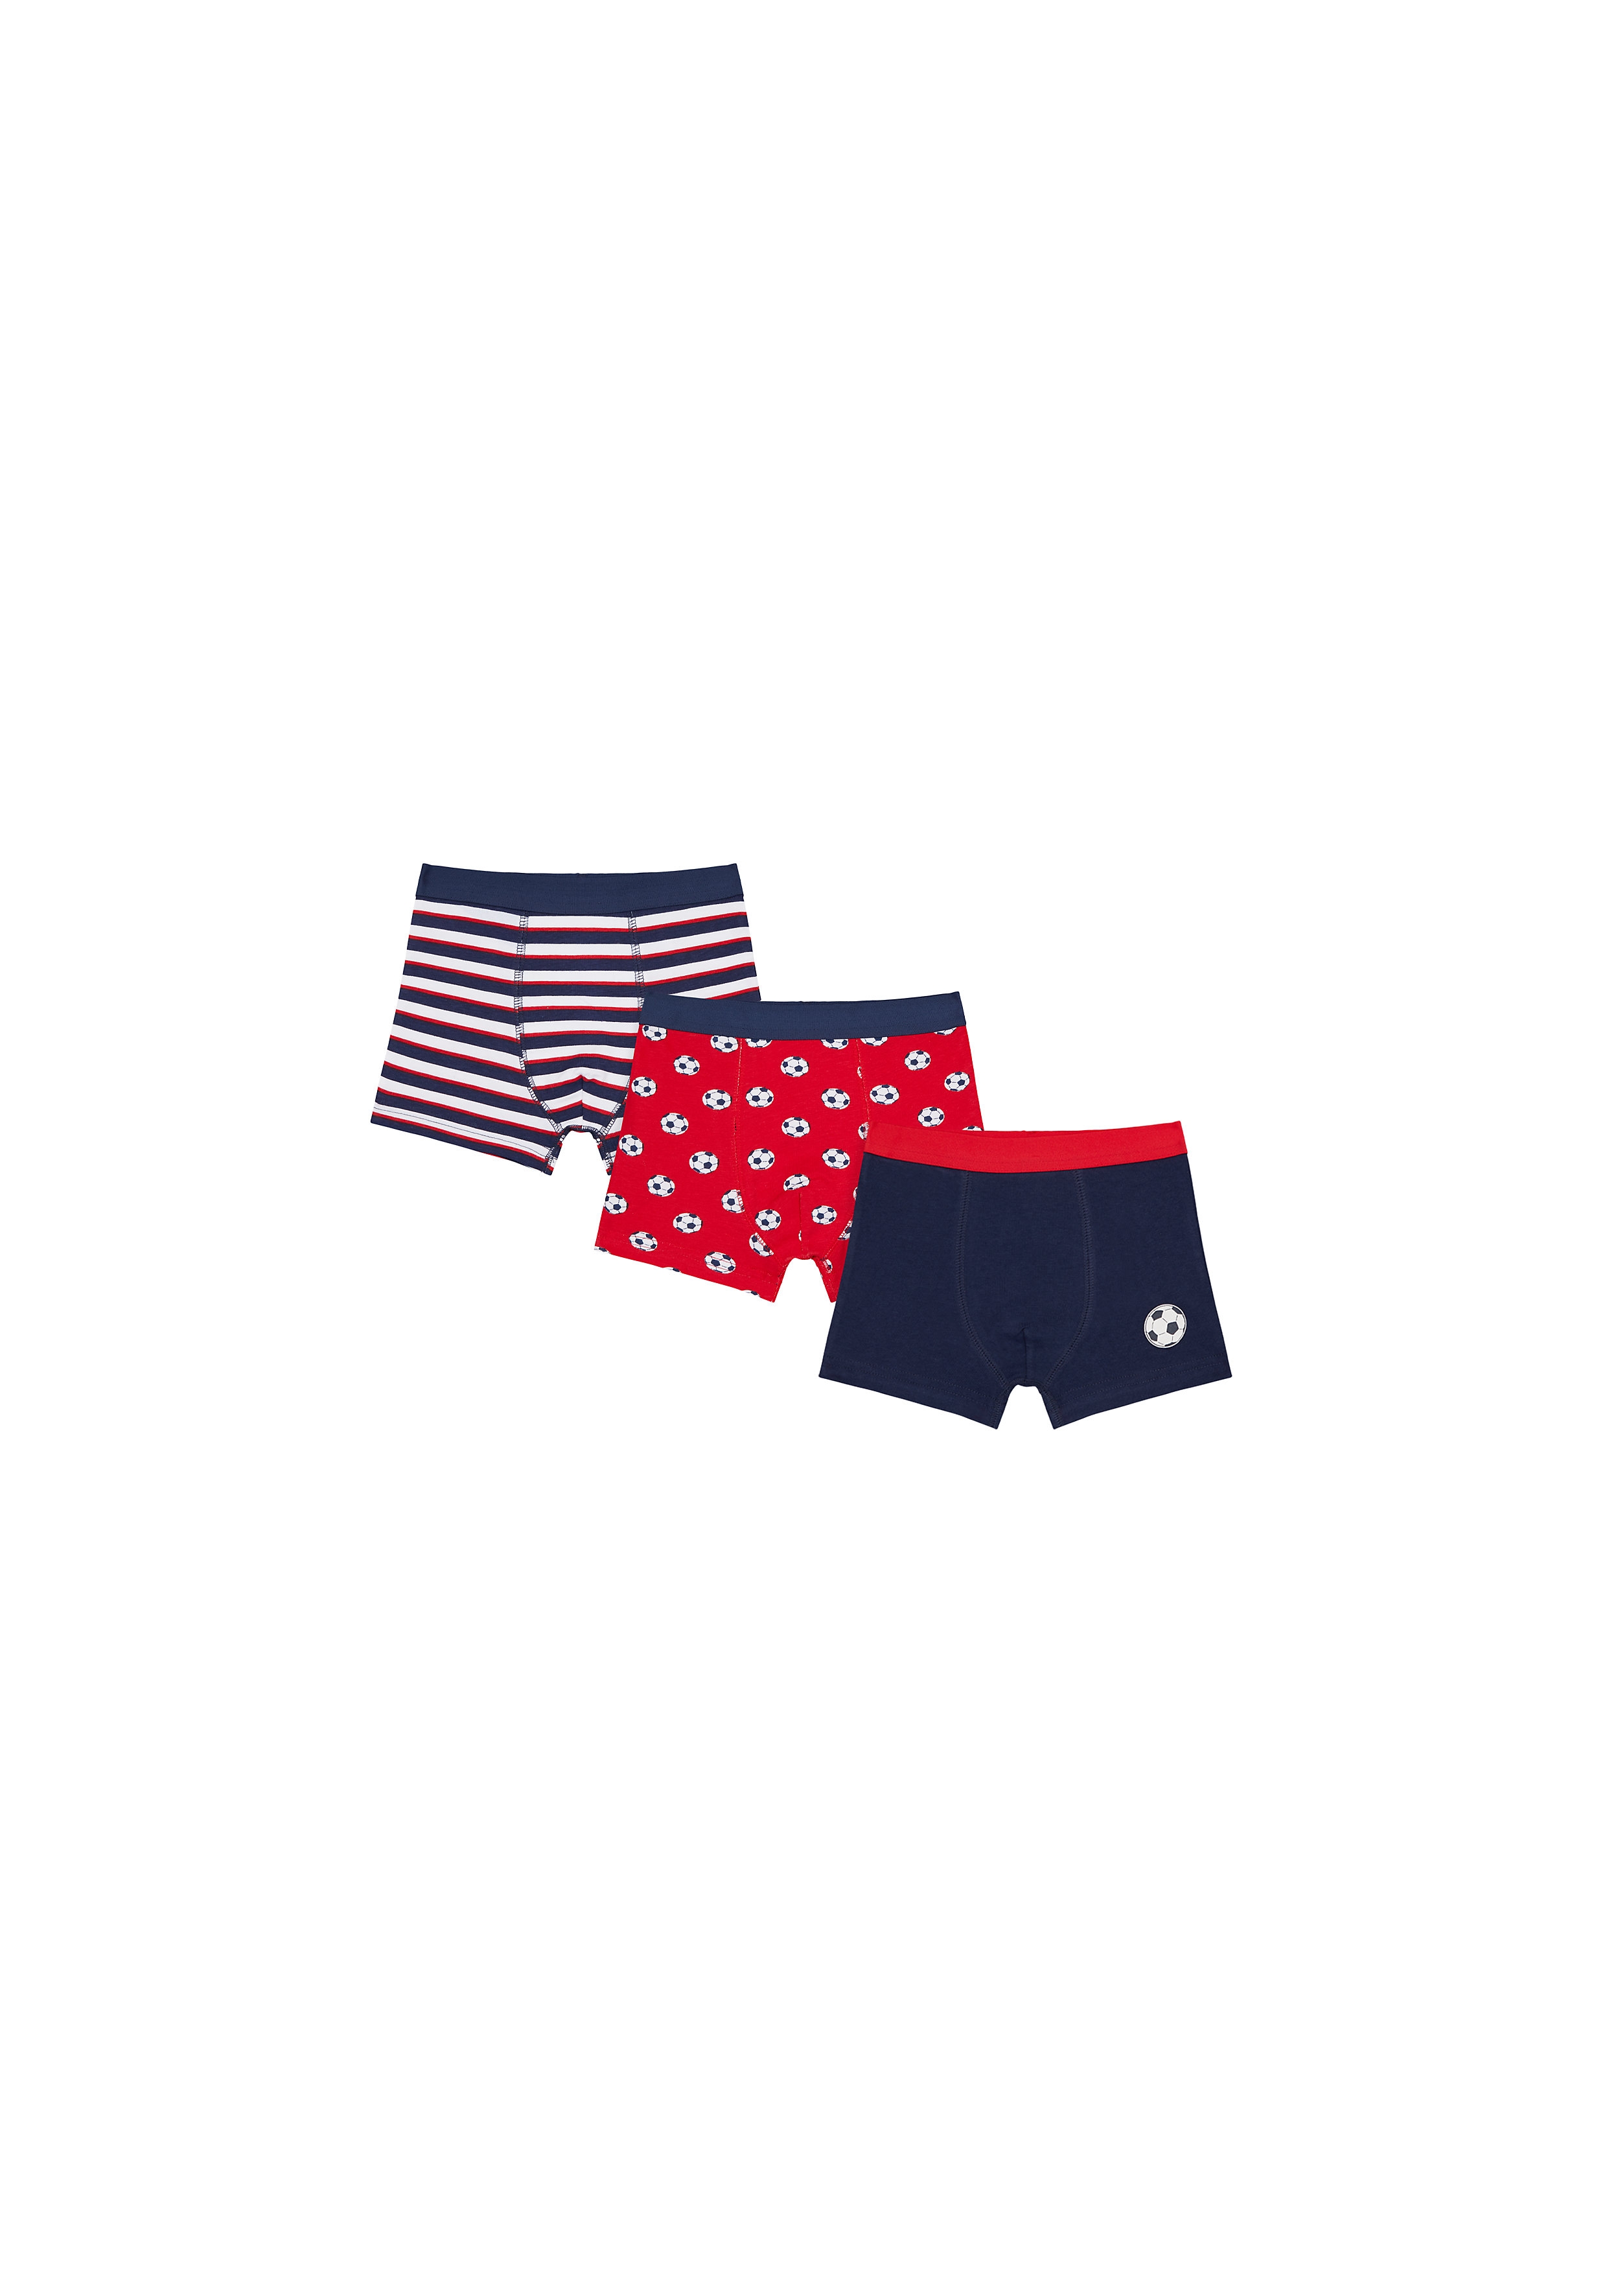 Mothercare | Boys Briefs Striped And Football Print - Pack Of 3 - Multicolor